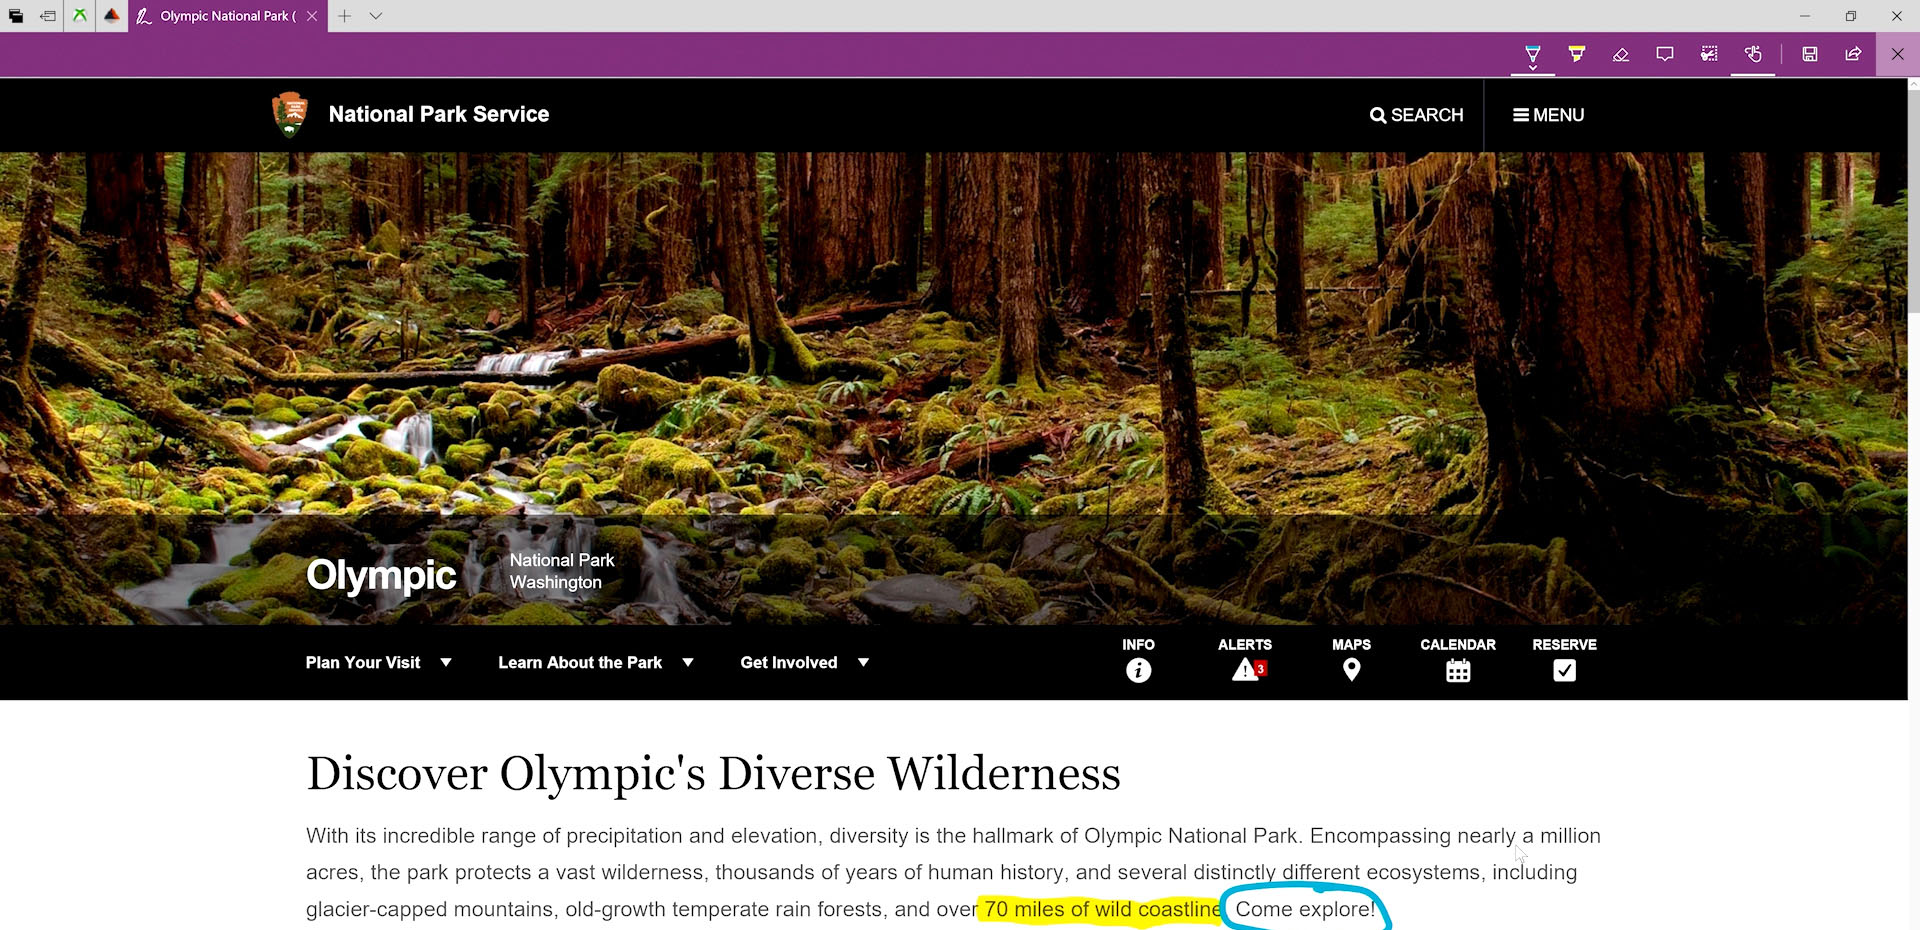 Windows Ink shown highlighting and writing on a webpage in Microsoft Edge.